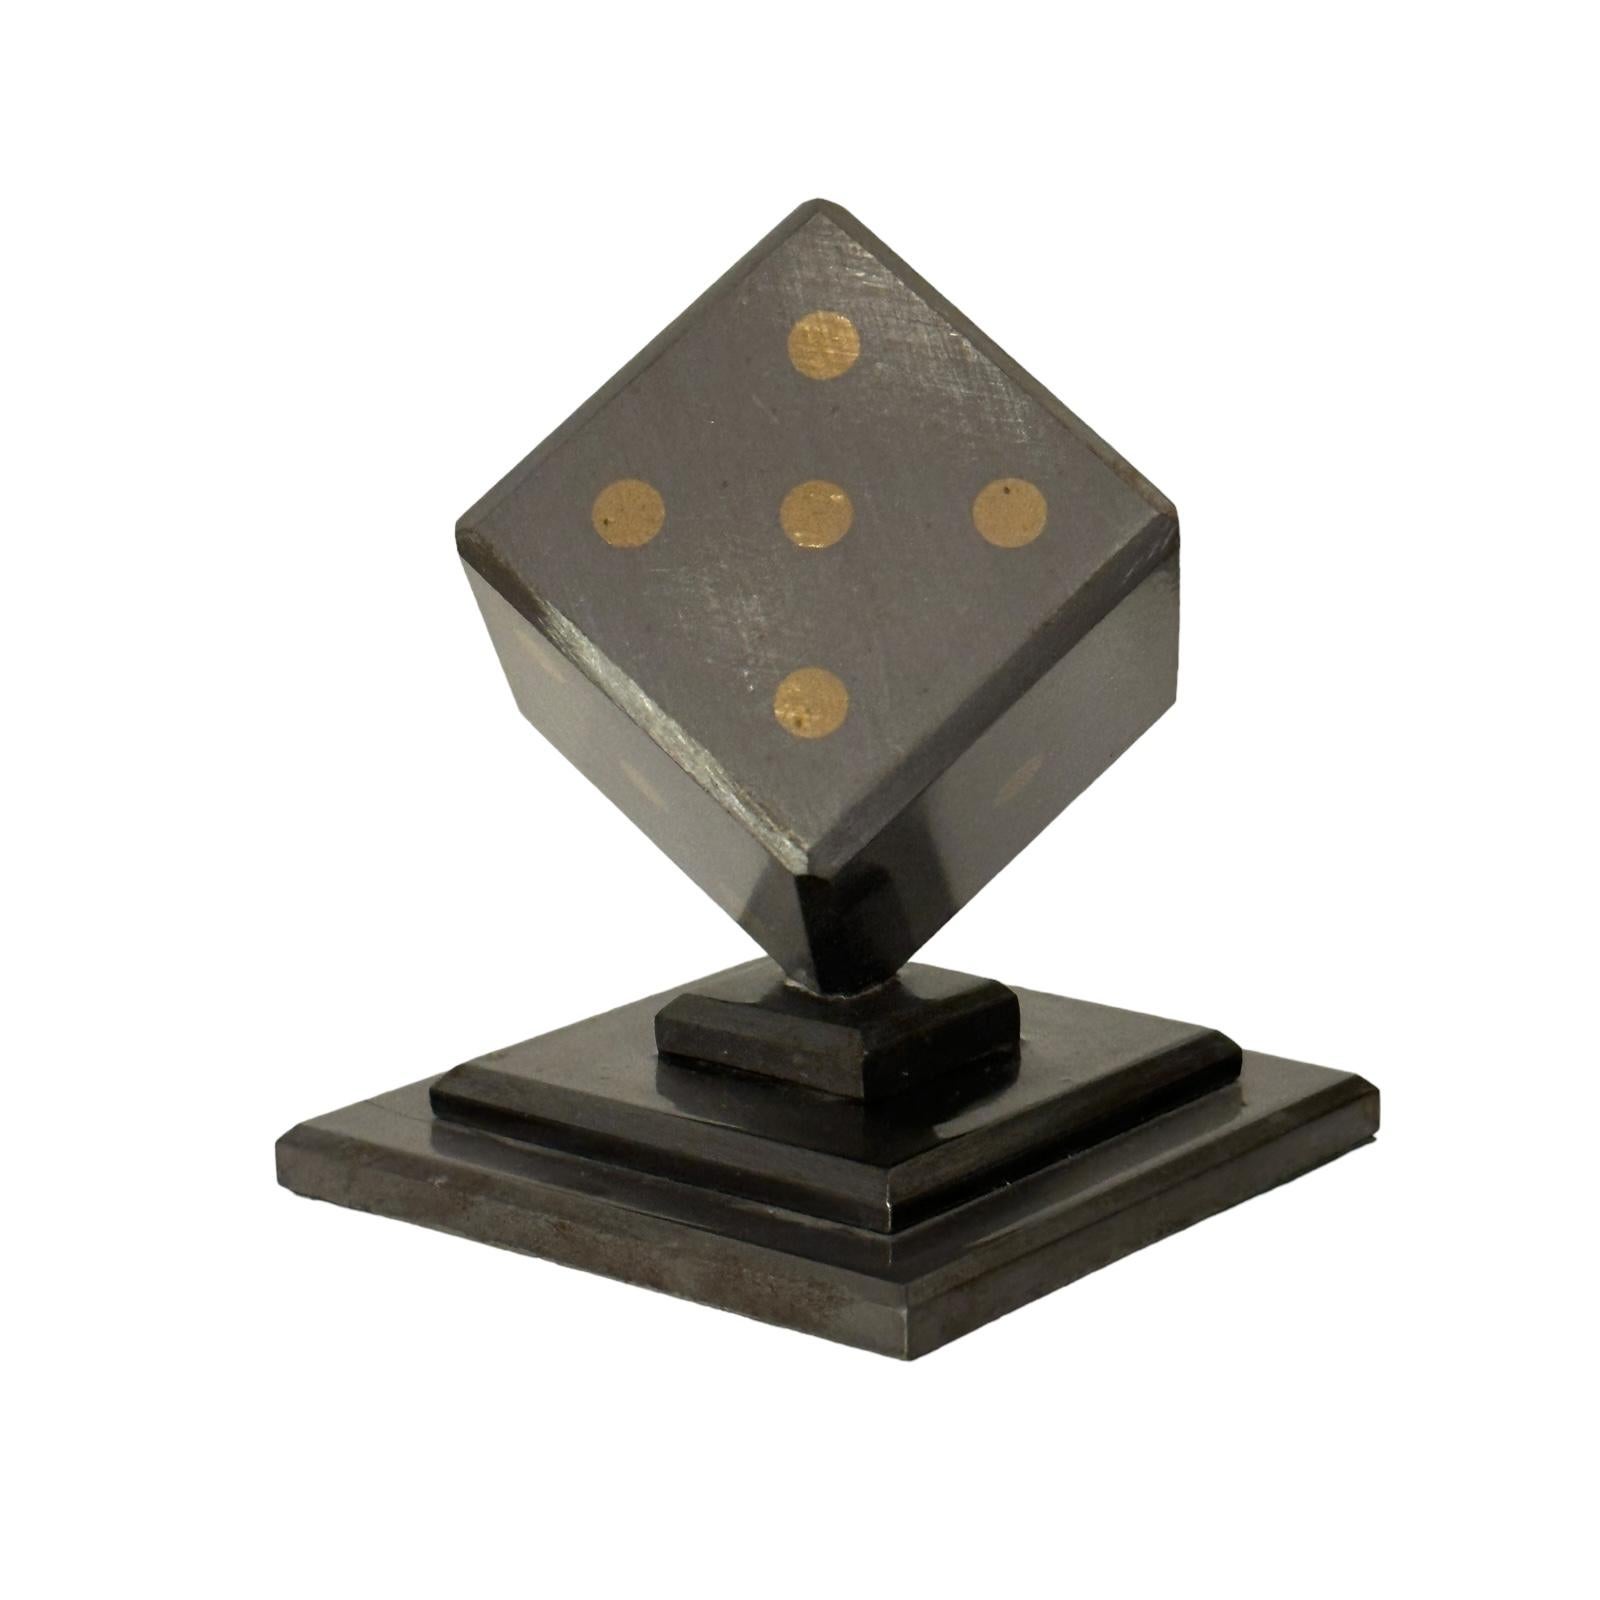 Dice Metal Statue Paper Weight Mid-Century Modern, German, 1970s For Sale 1